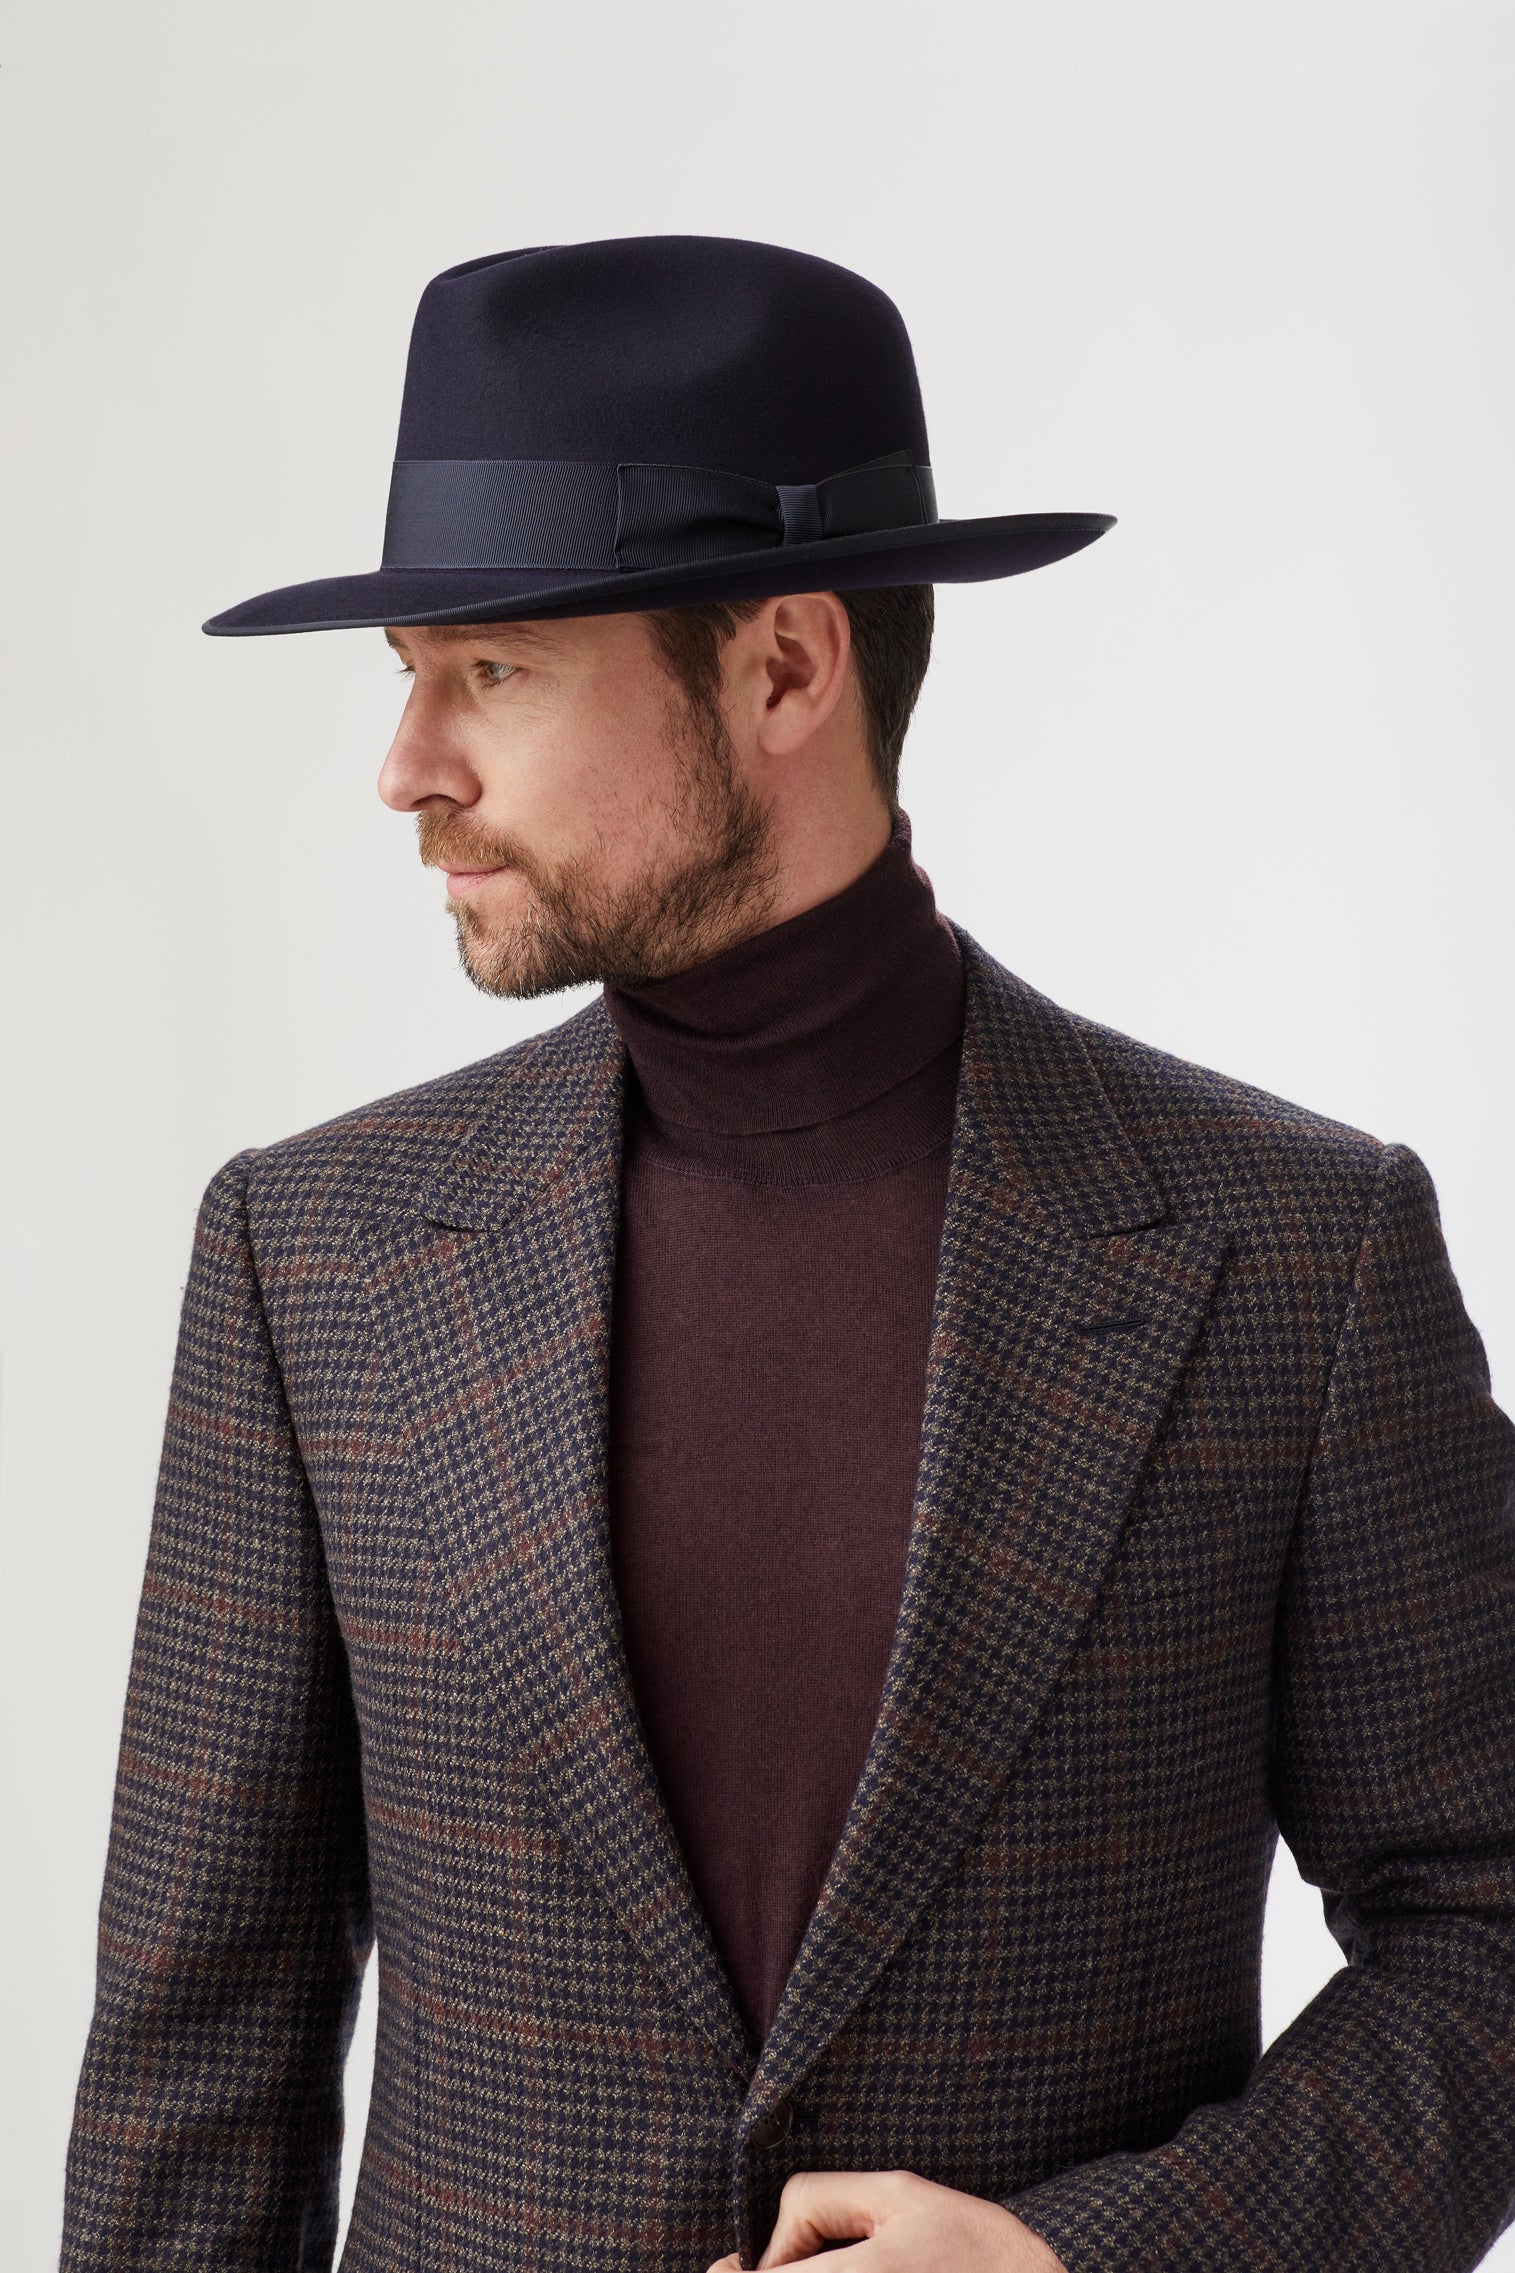 St James's Fedora - Hats for Round Face Shapes - Lock & Co. Hatters London UK